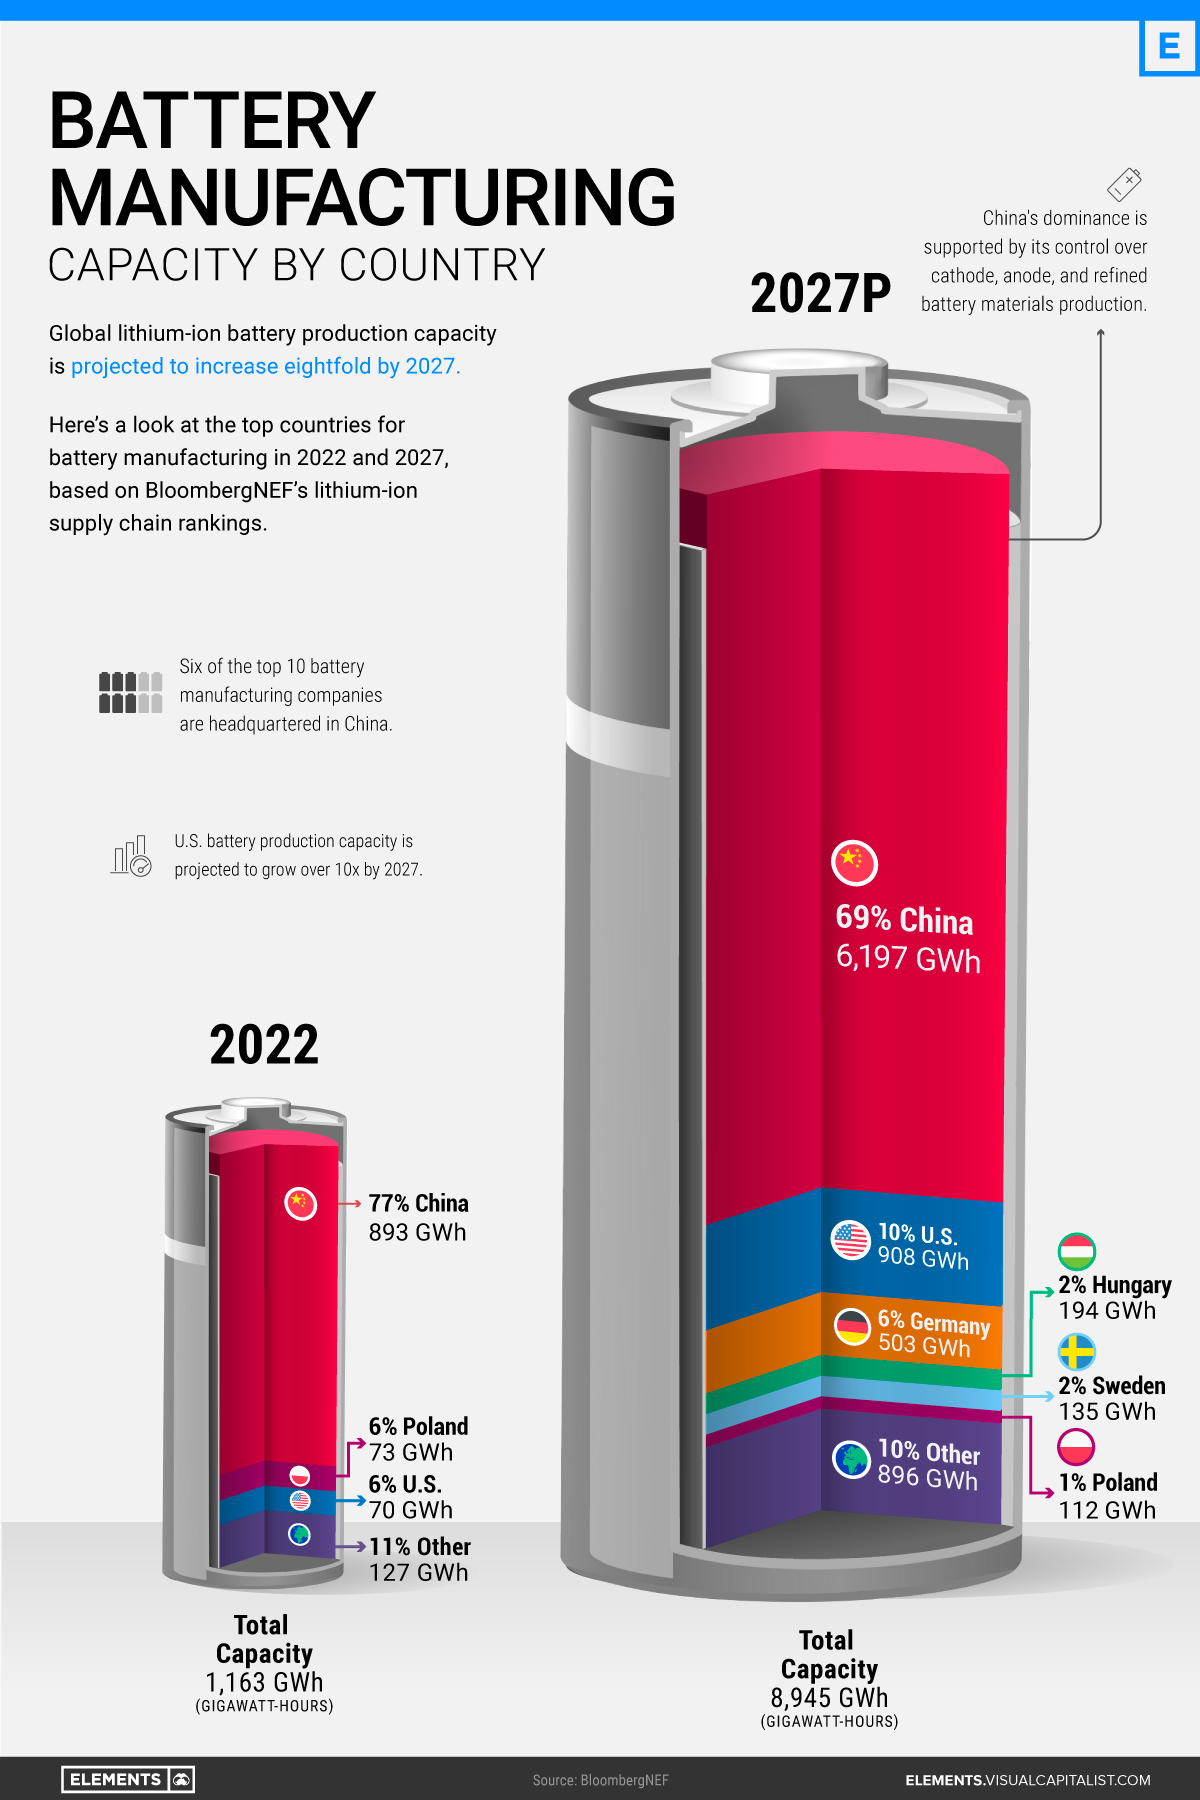 Battery-Manufacturing-Capacity-by-Country-2022-2027.jpg